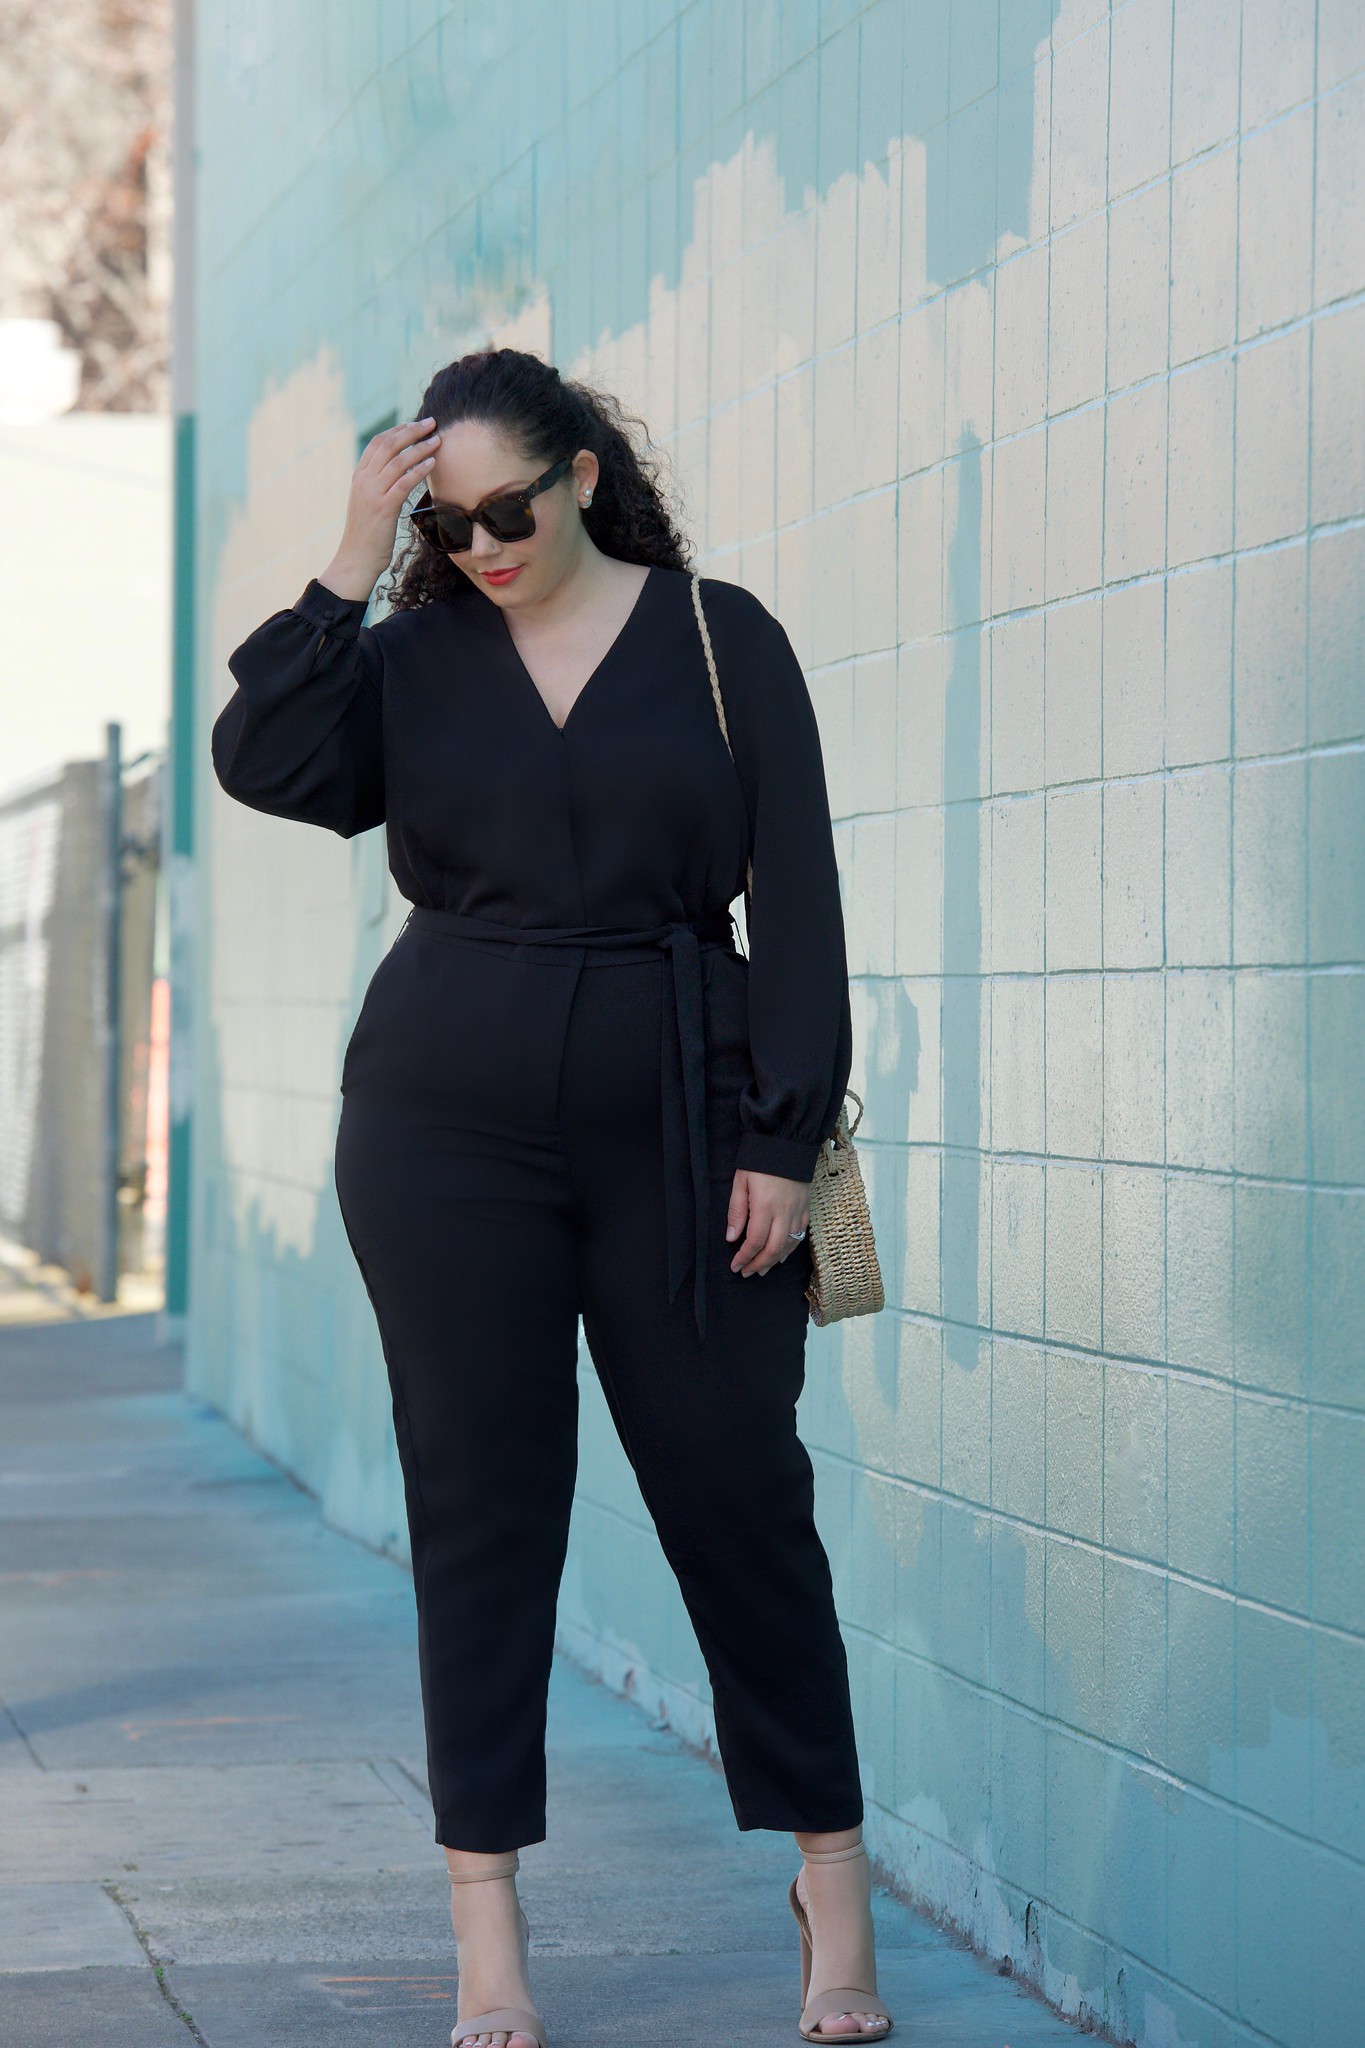 This $23 Jumpsuit Looks Amazing on Curves via Girl With Curves #curvyfashion #plussize #bodypositive